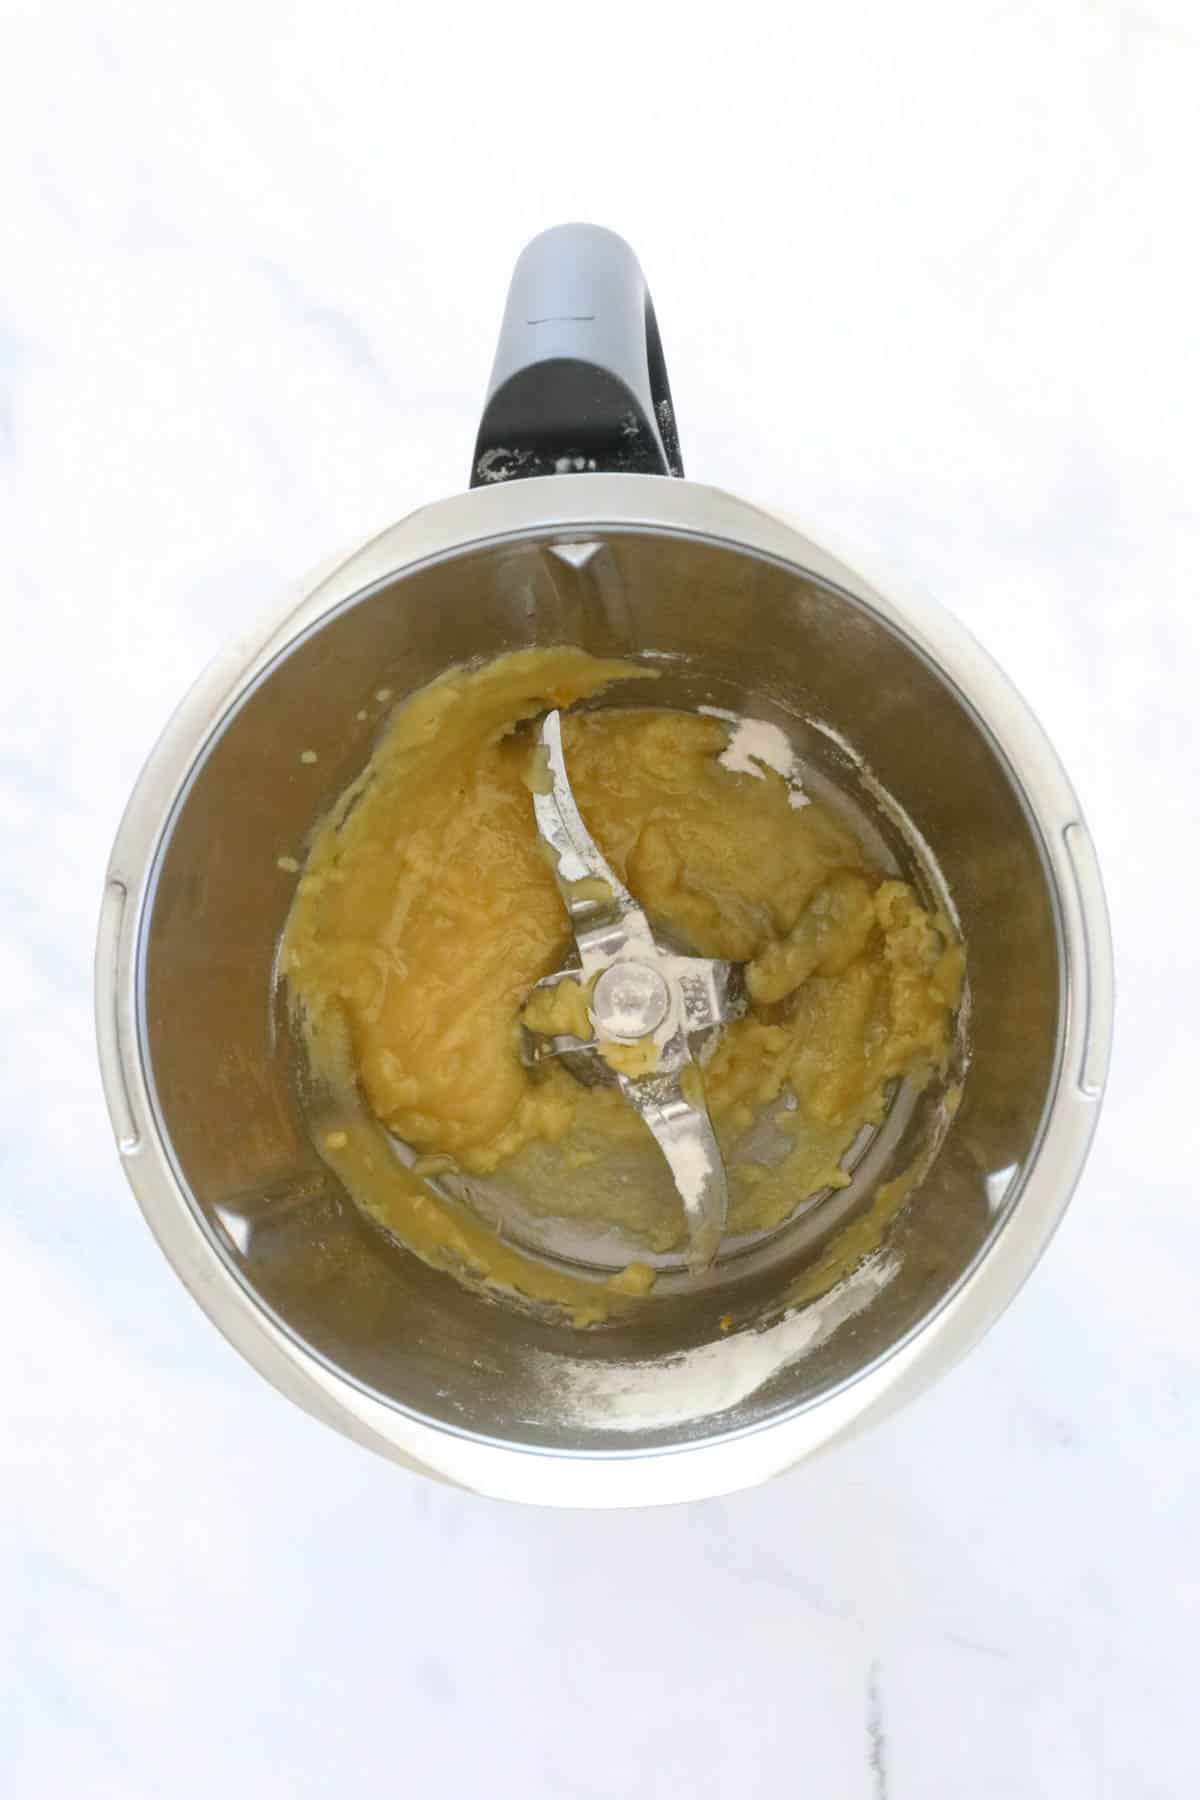 Butter and flour in a stainless bowl.